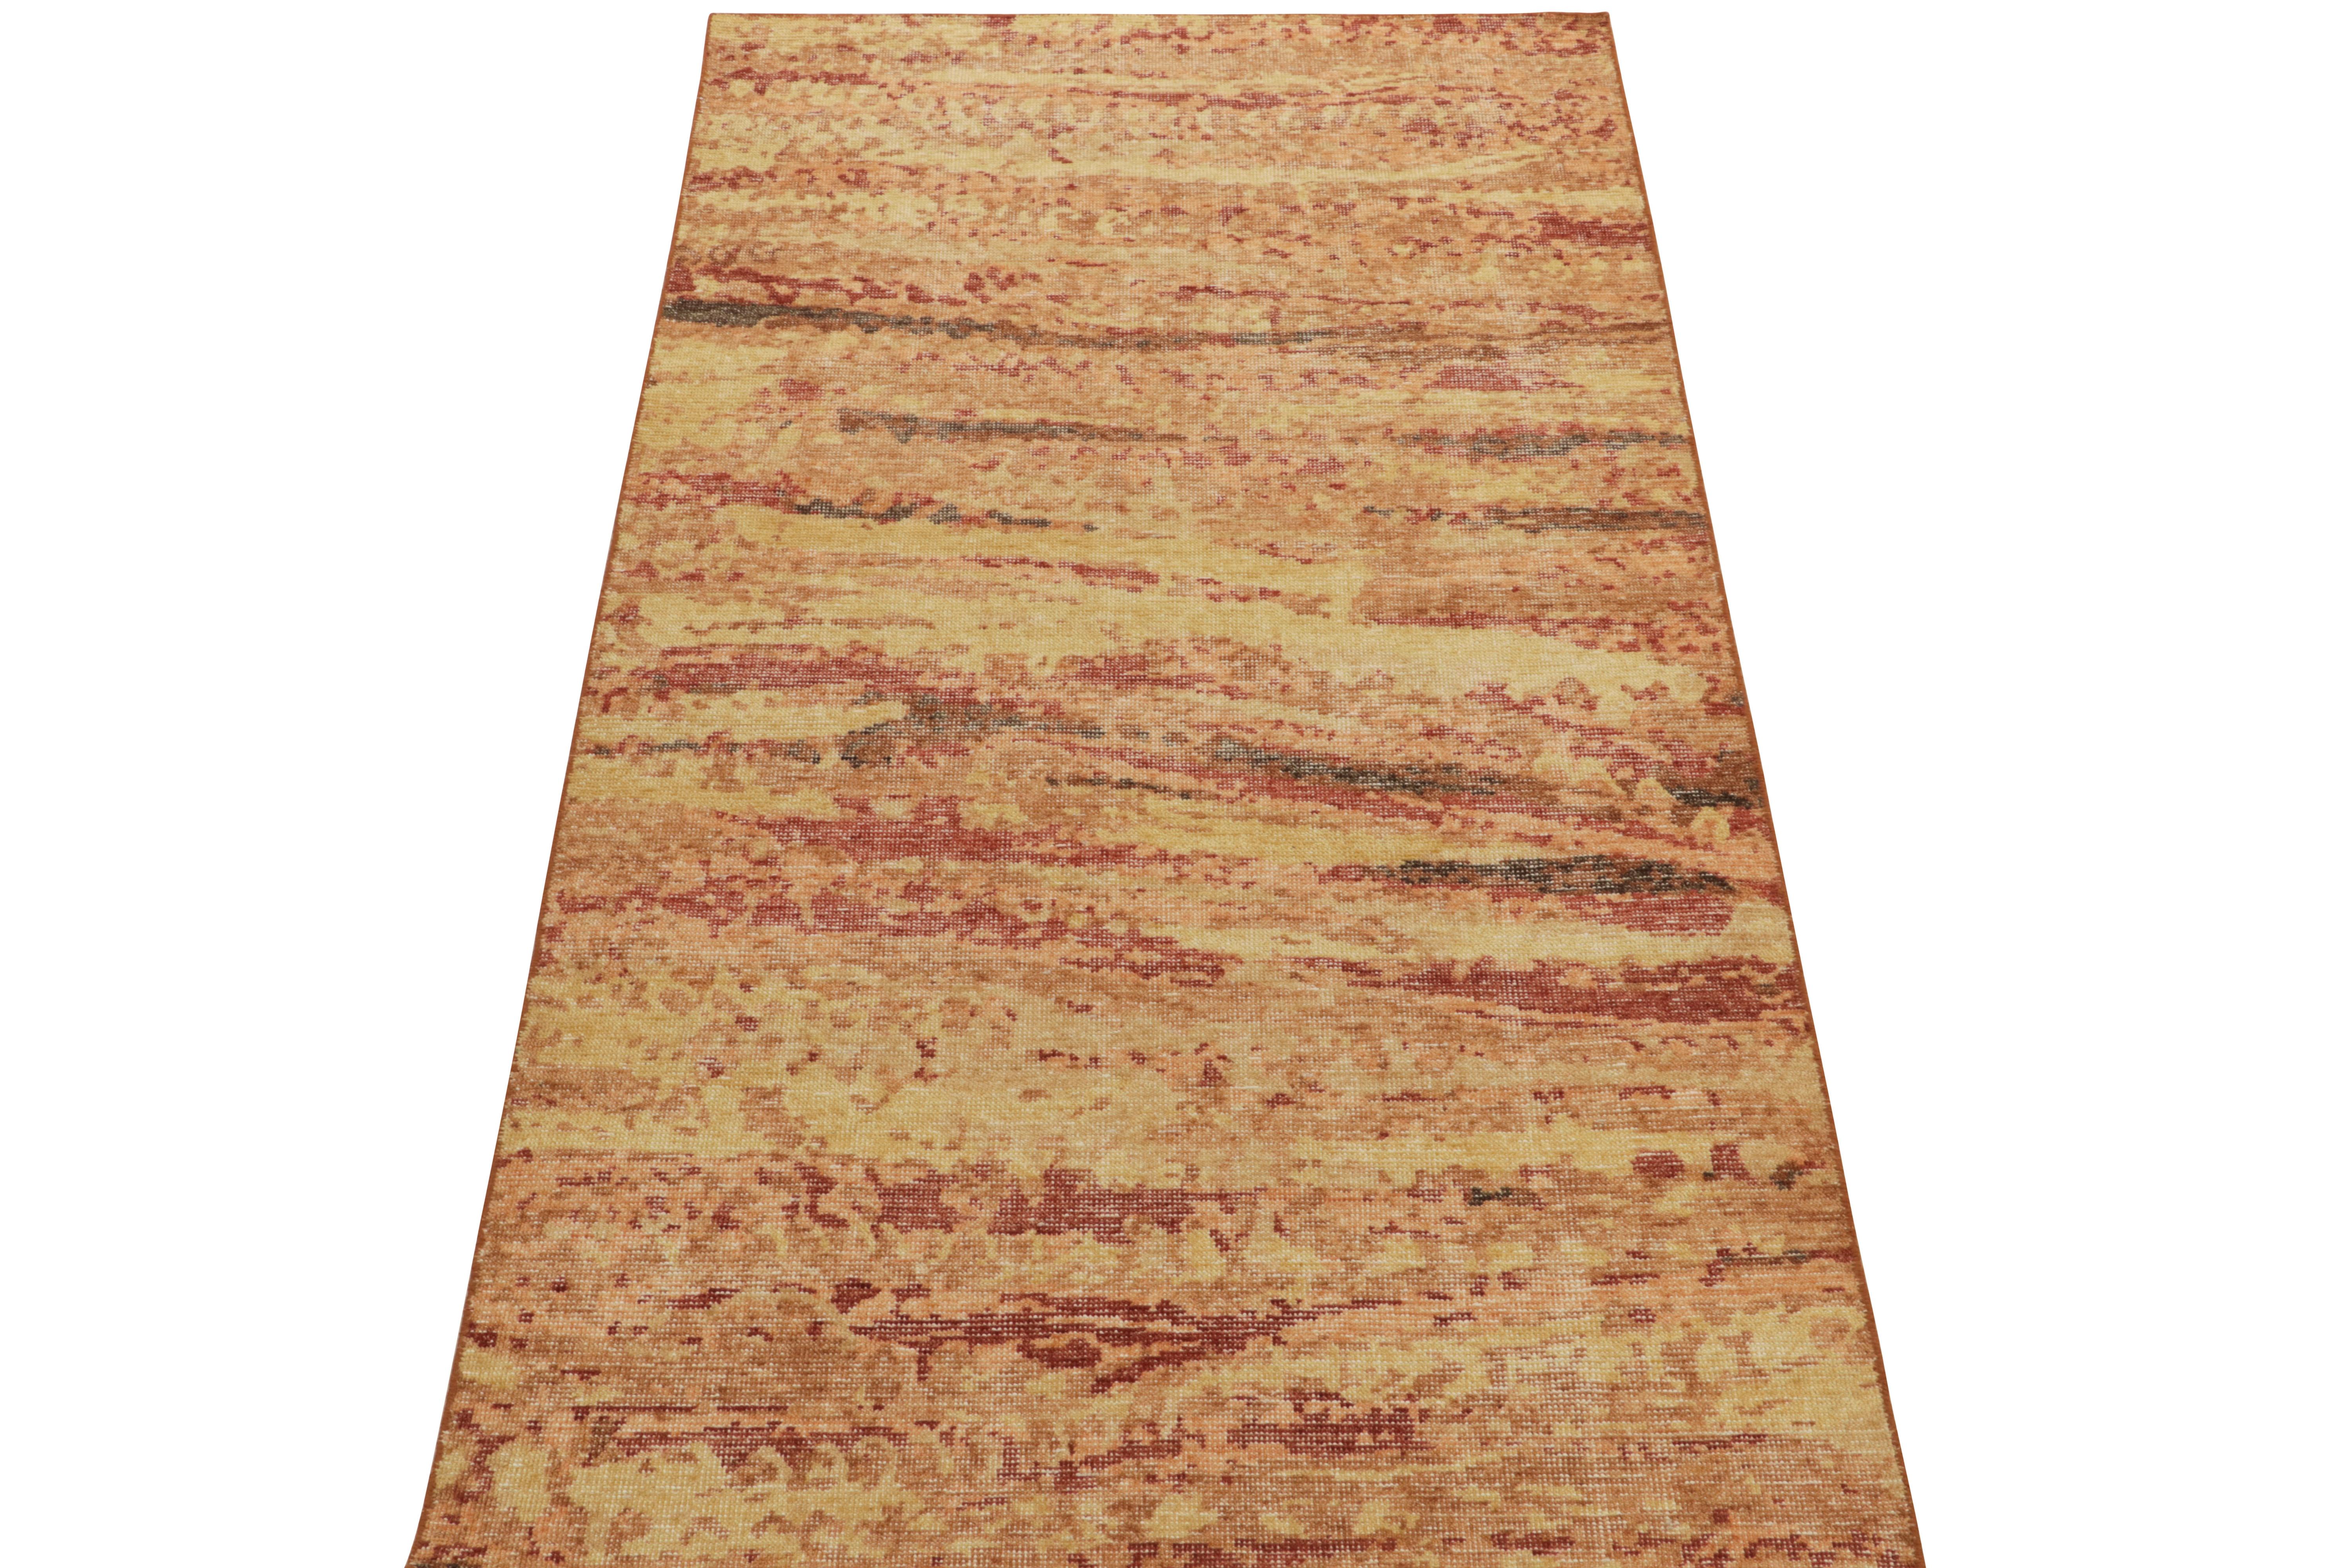 From Rug & Kilim’s Homage collection, a 4x8 distressed style abstract rug enjoying a warm, vibrant play of scarlet red, light tangerine, molten gold & brown tones for a unique take in this celebrated line. Exemplifying the easy-to-maintain,